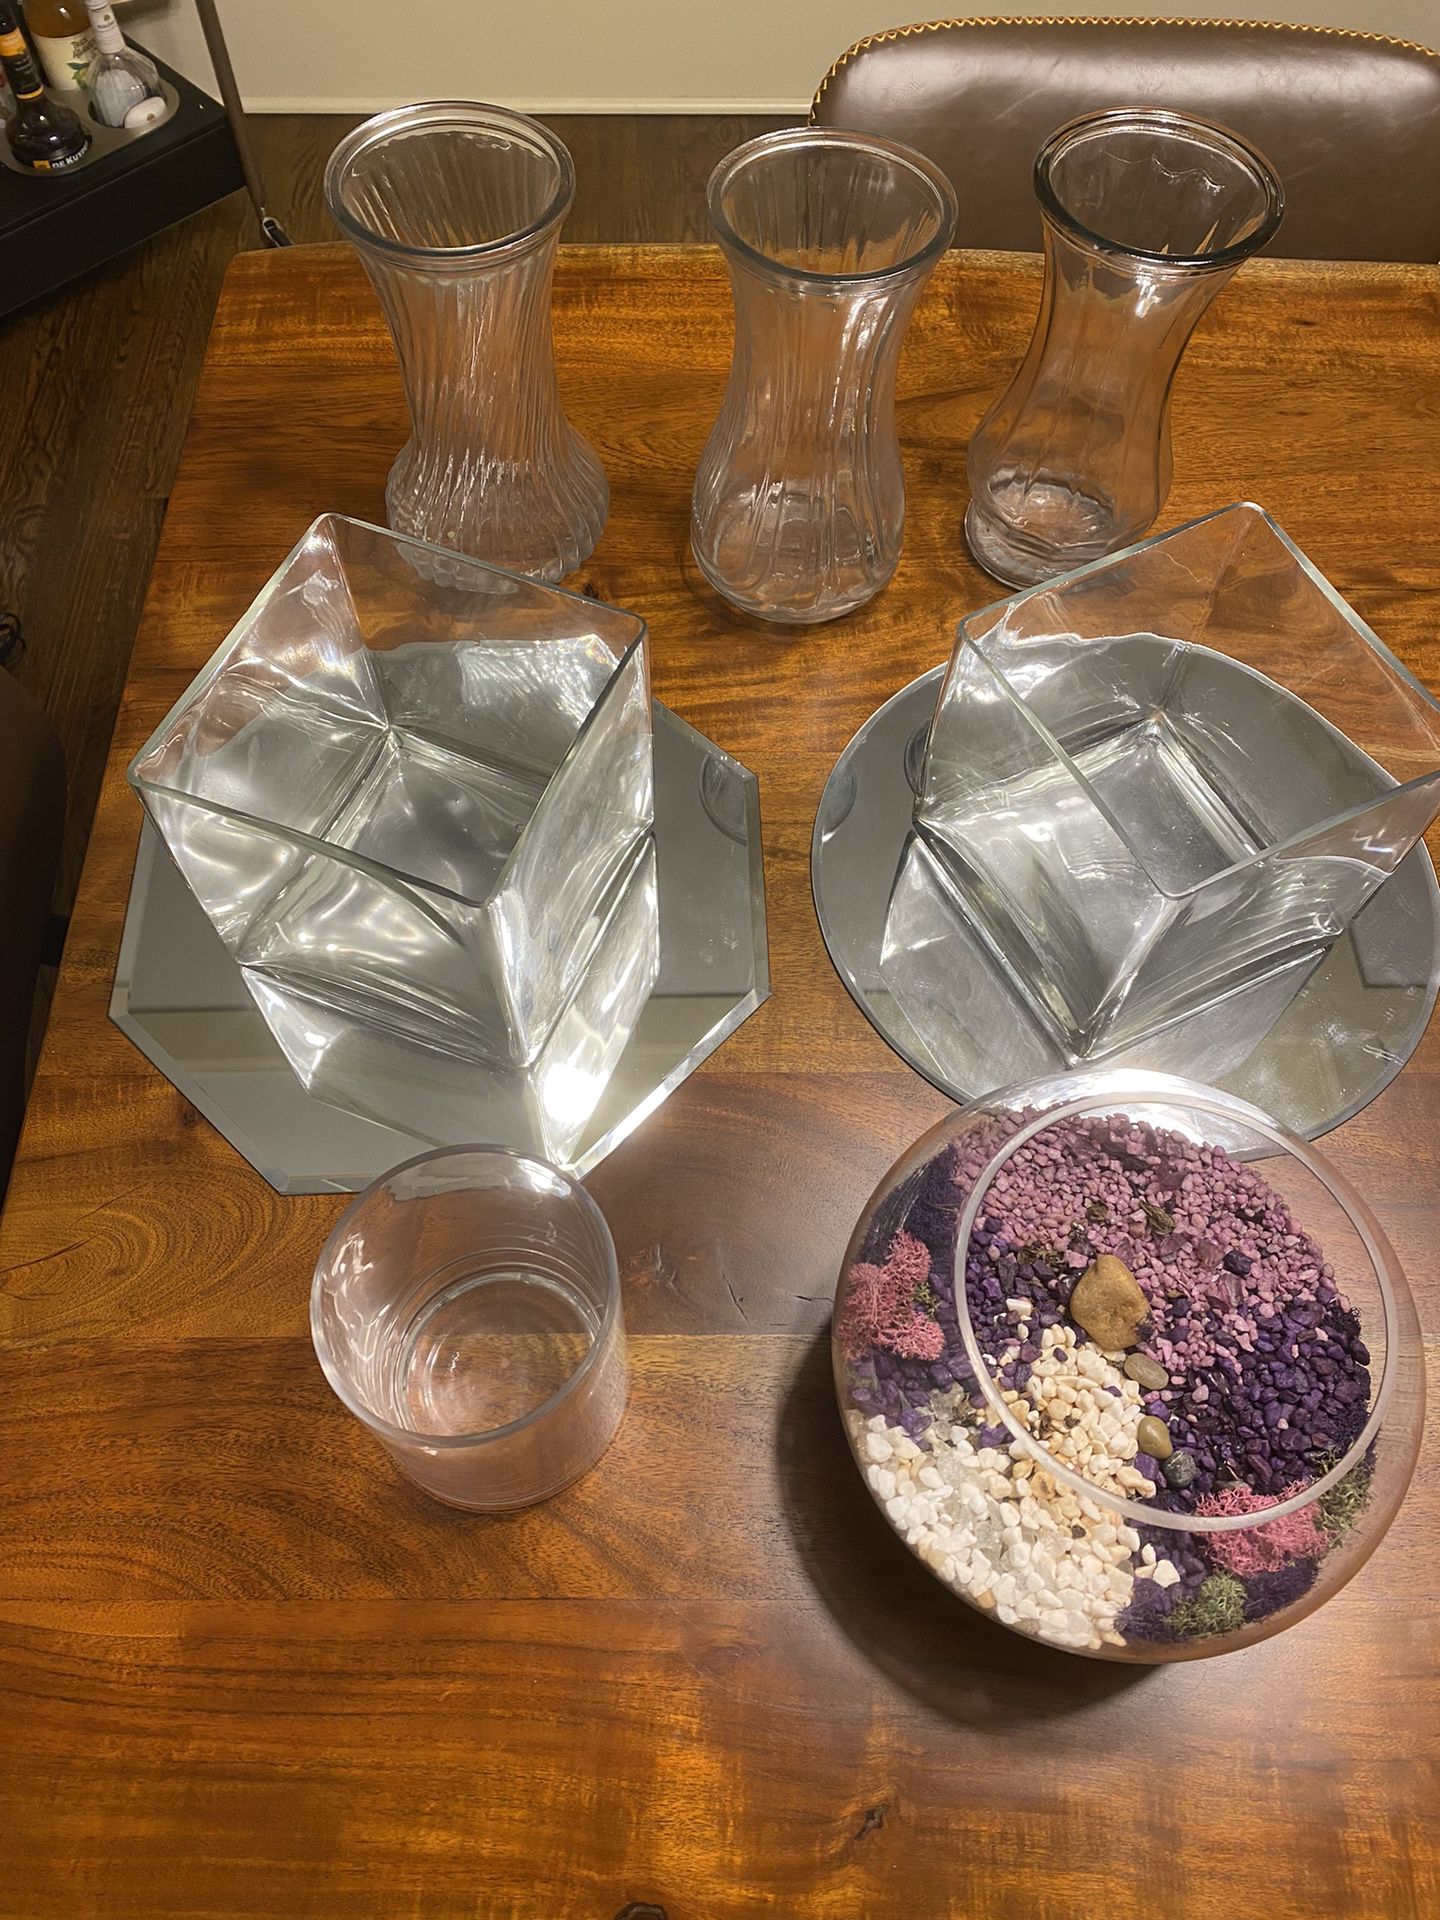 Variety of glass flower vases and plant terrarium 9 items total. 3 round tall vases + 2 short square vases with the 2 mirrors underneath + 1 plant ter